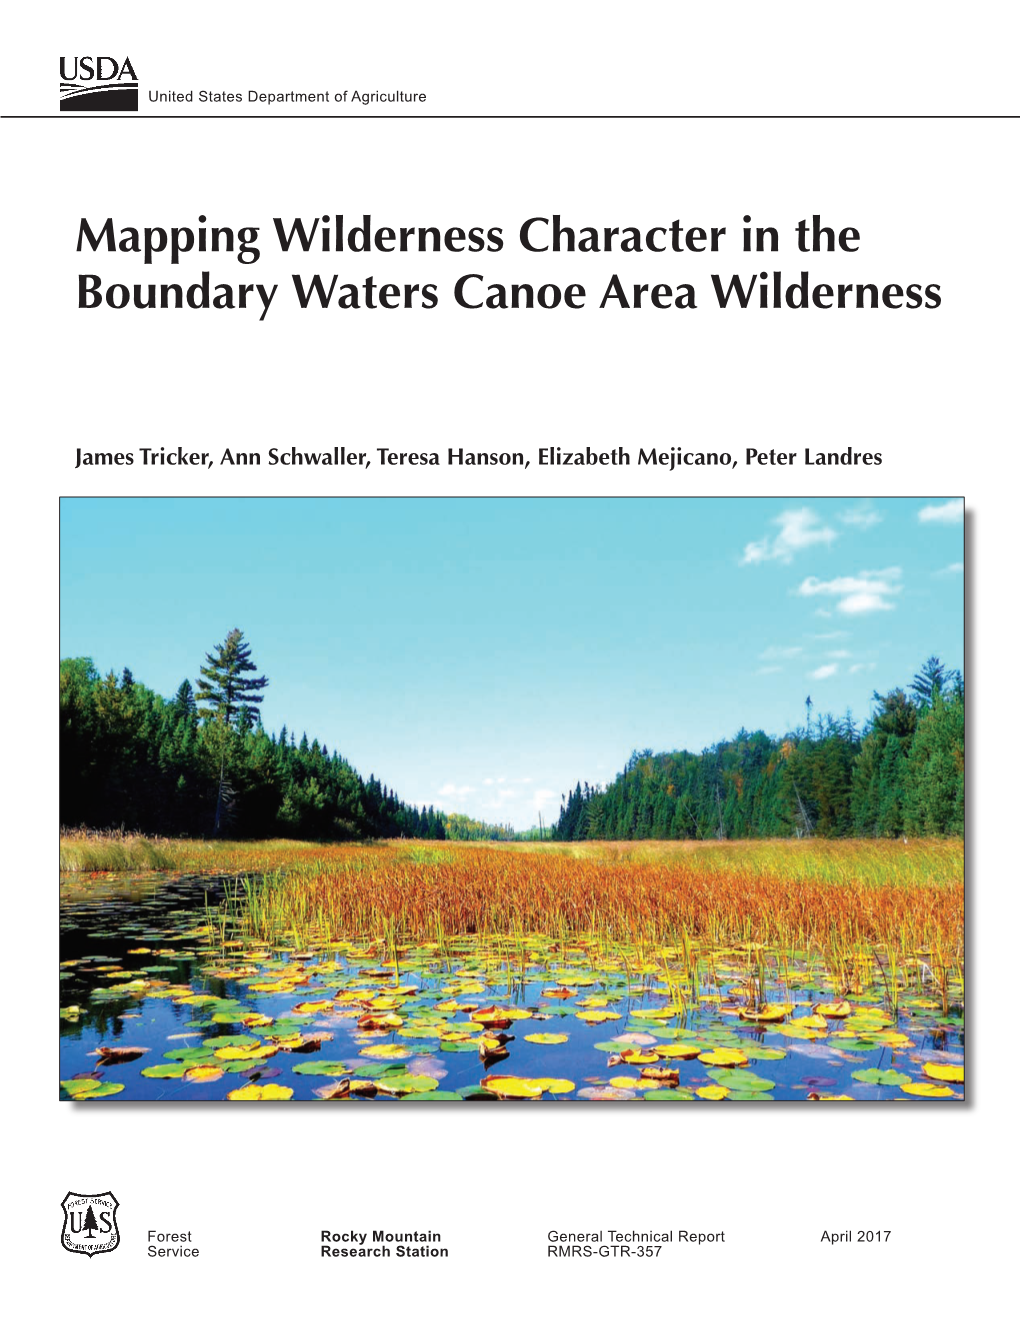 Mapping Wilderness Character in the Boundary Waters Canoe Area Wilderness